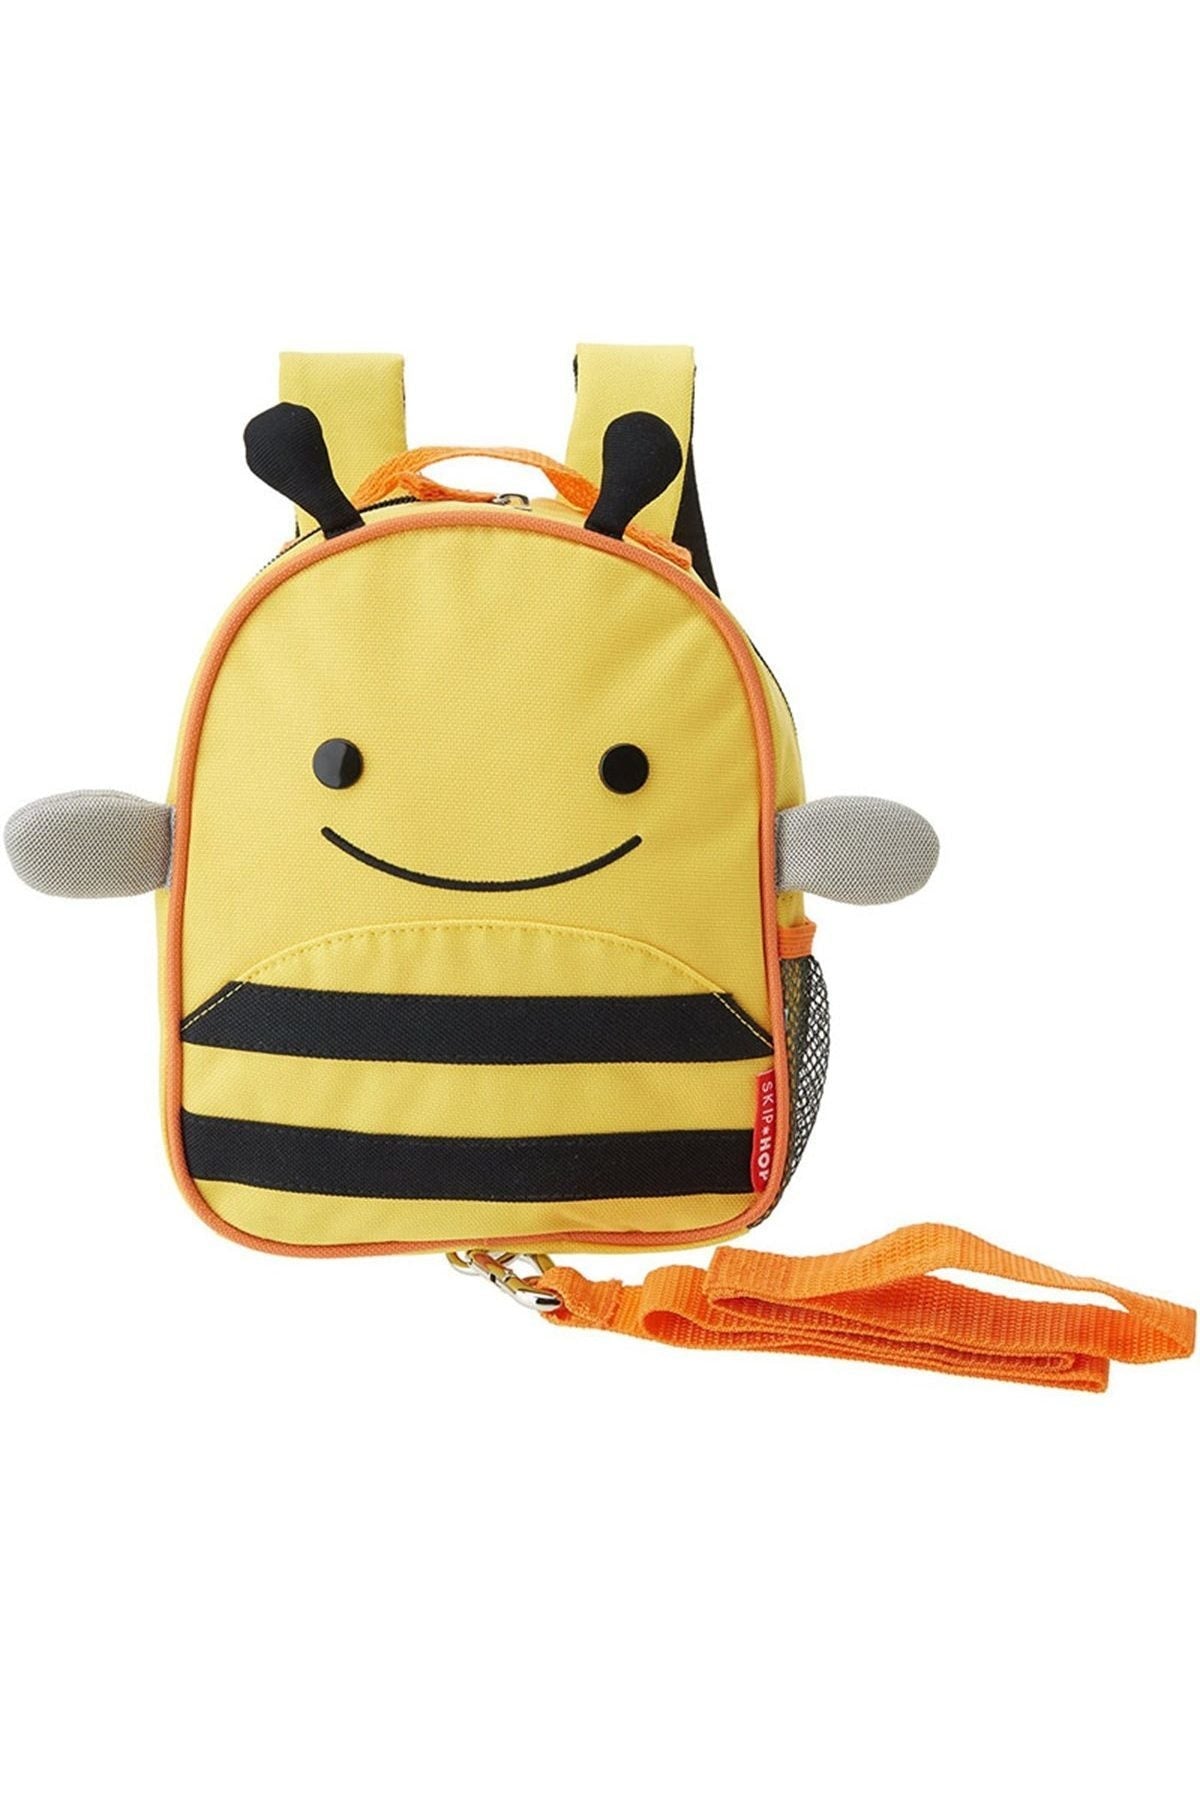 Zoo Backpack with Seat Belt Yellow-Black